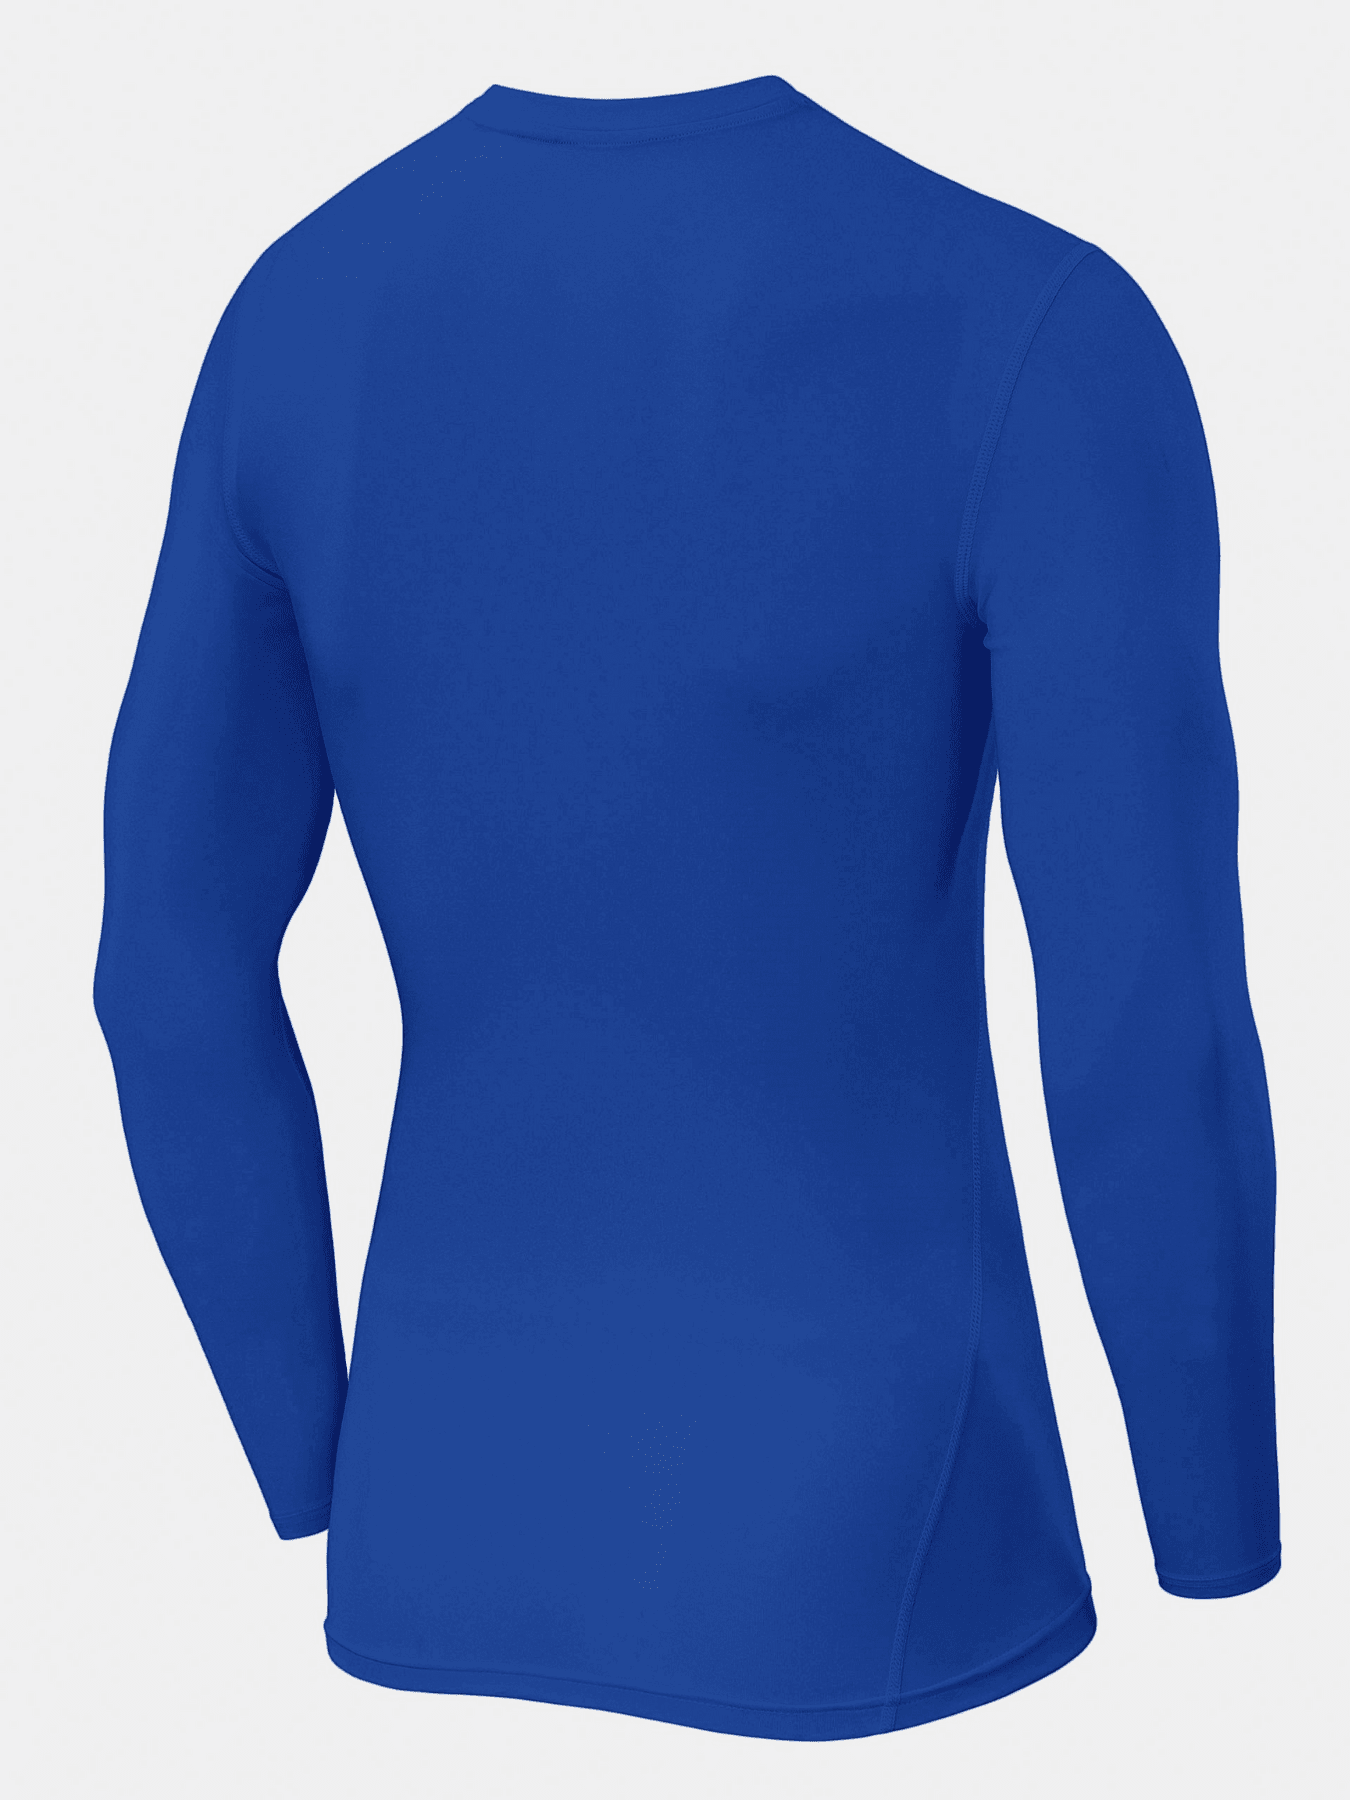 Pro Performance Compression Base Layer Long Sleeve Crew Neck For Boys